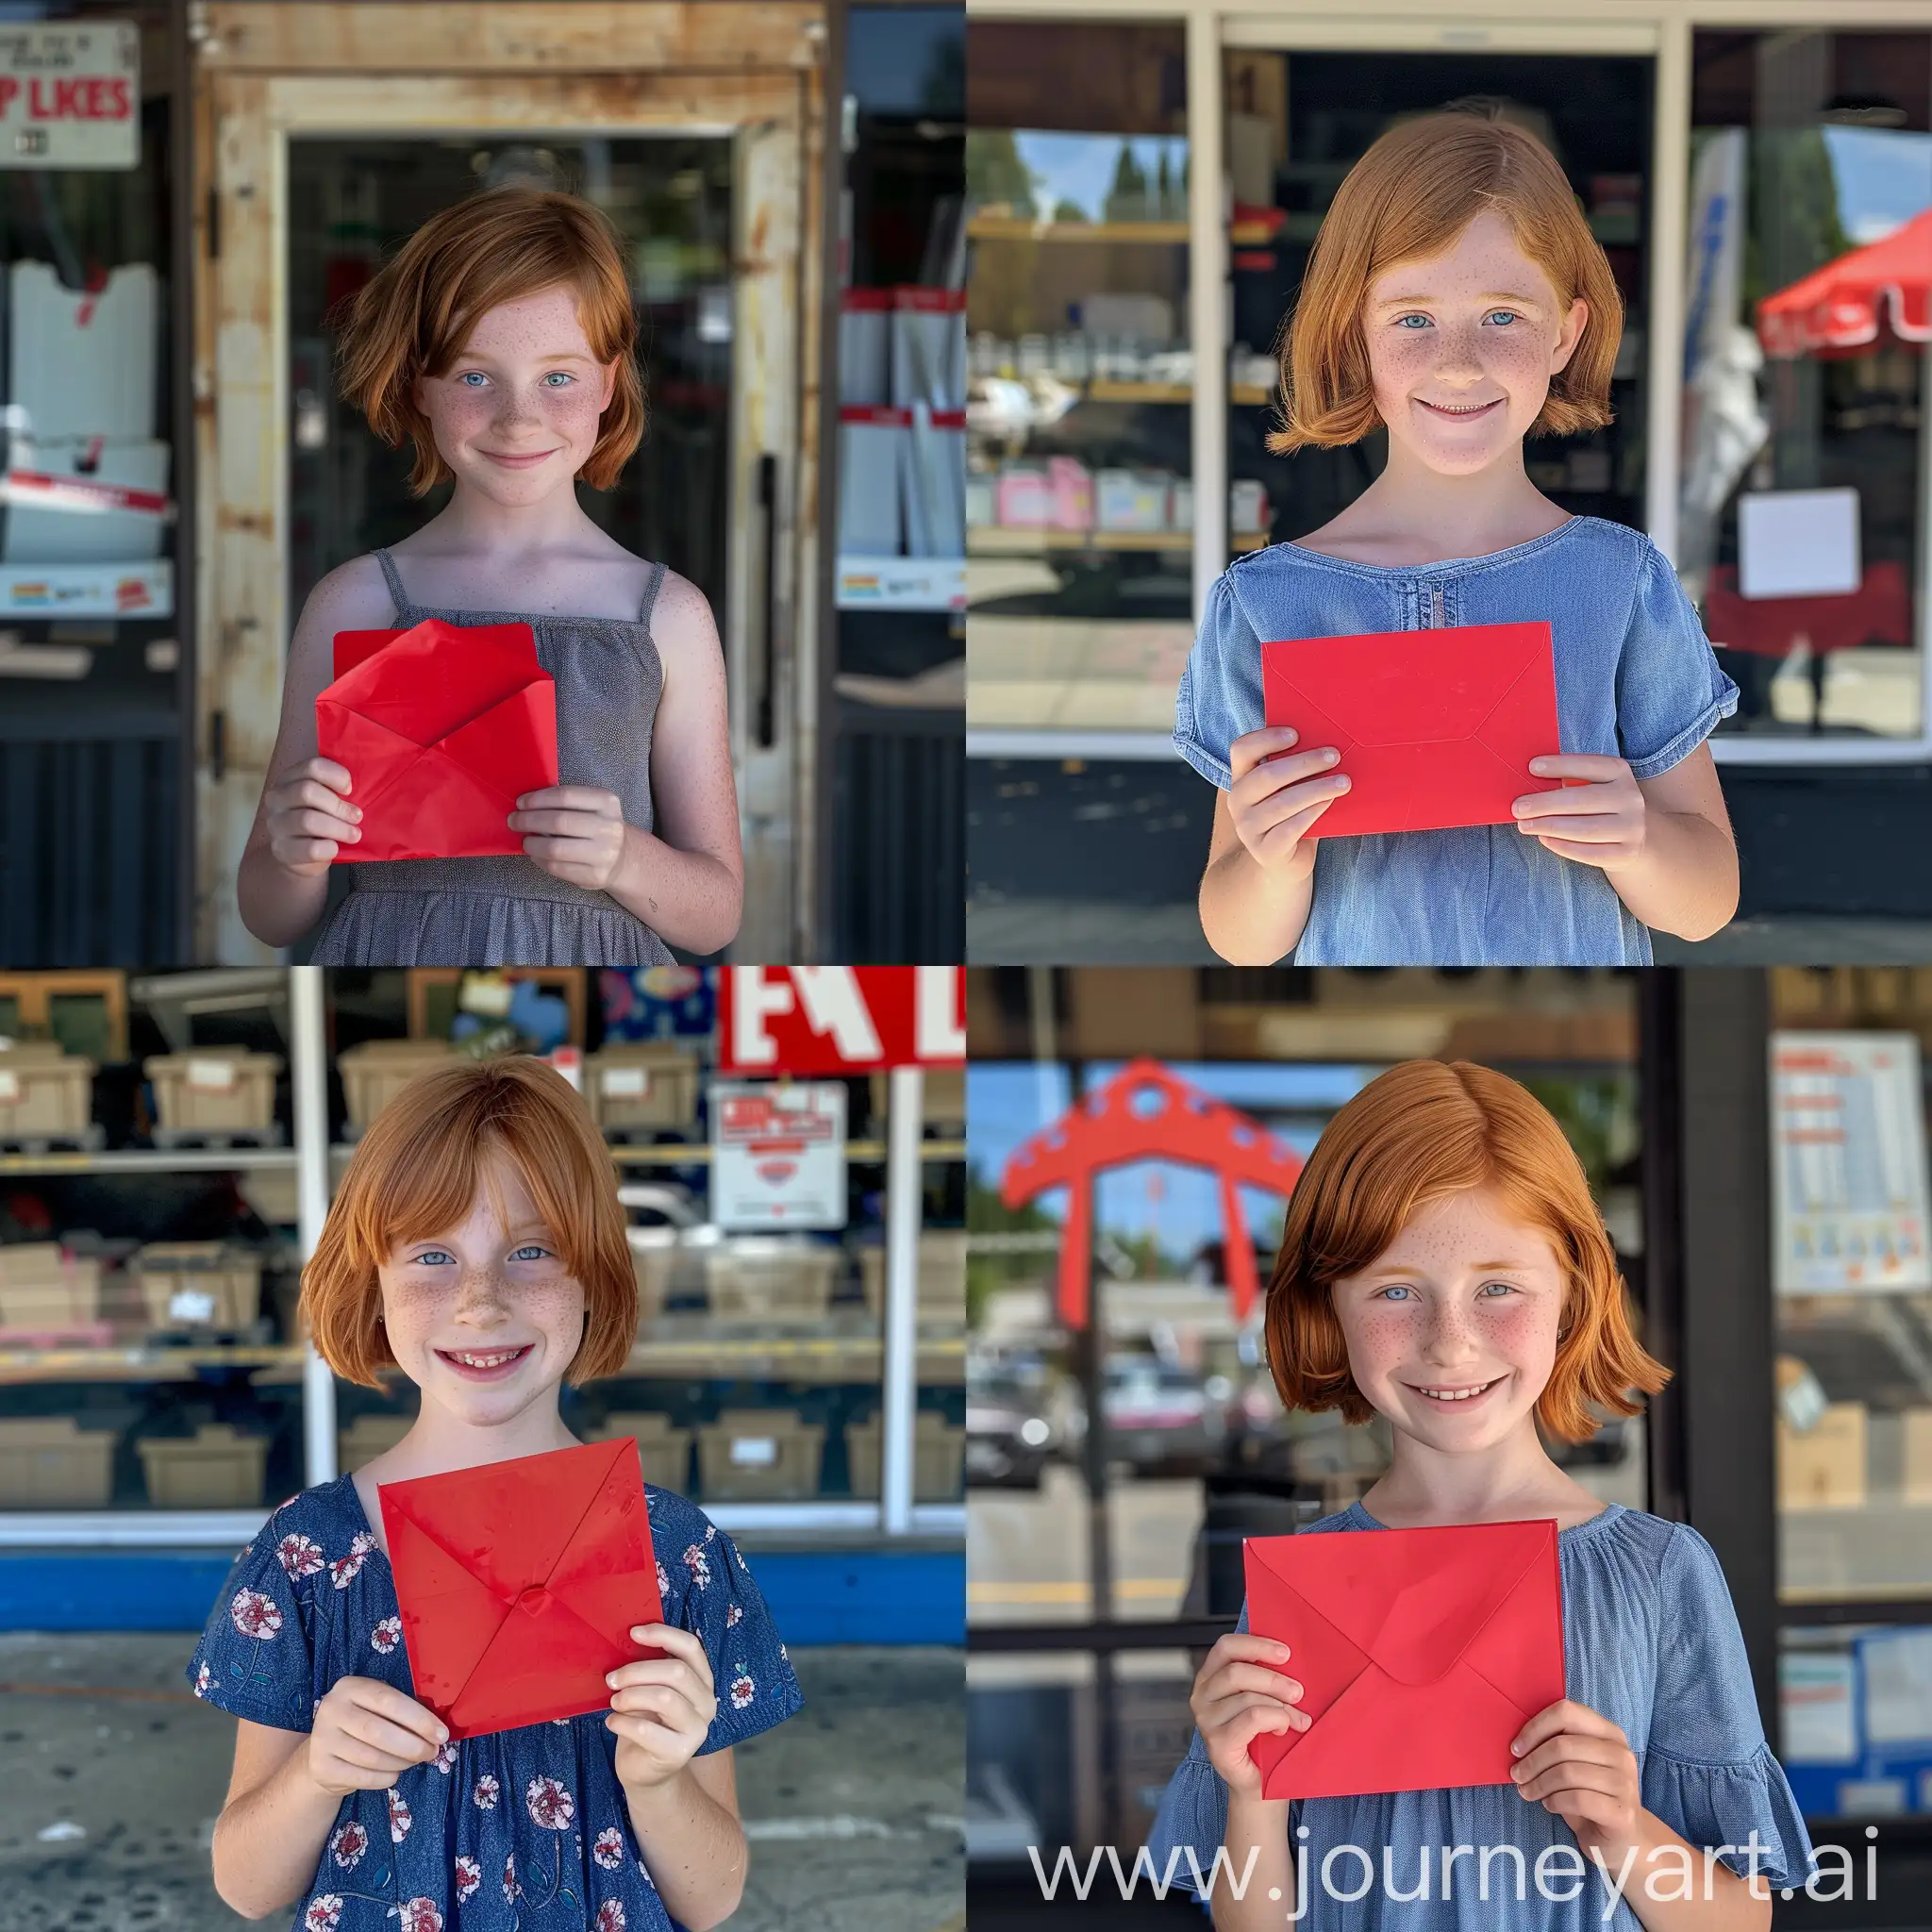 A 12 year old girl standing in front of a rental store holding a red envelope in her hand. She is happy with short ginger hair, blue eyes and a smile on her face. It is summer.